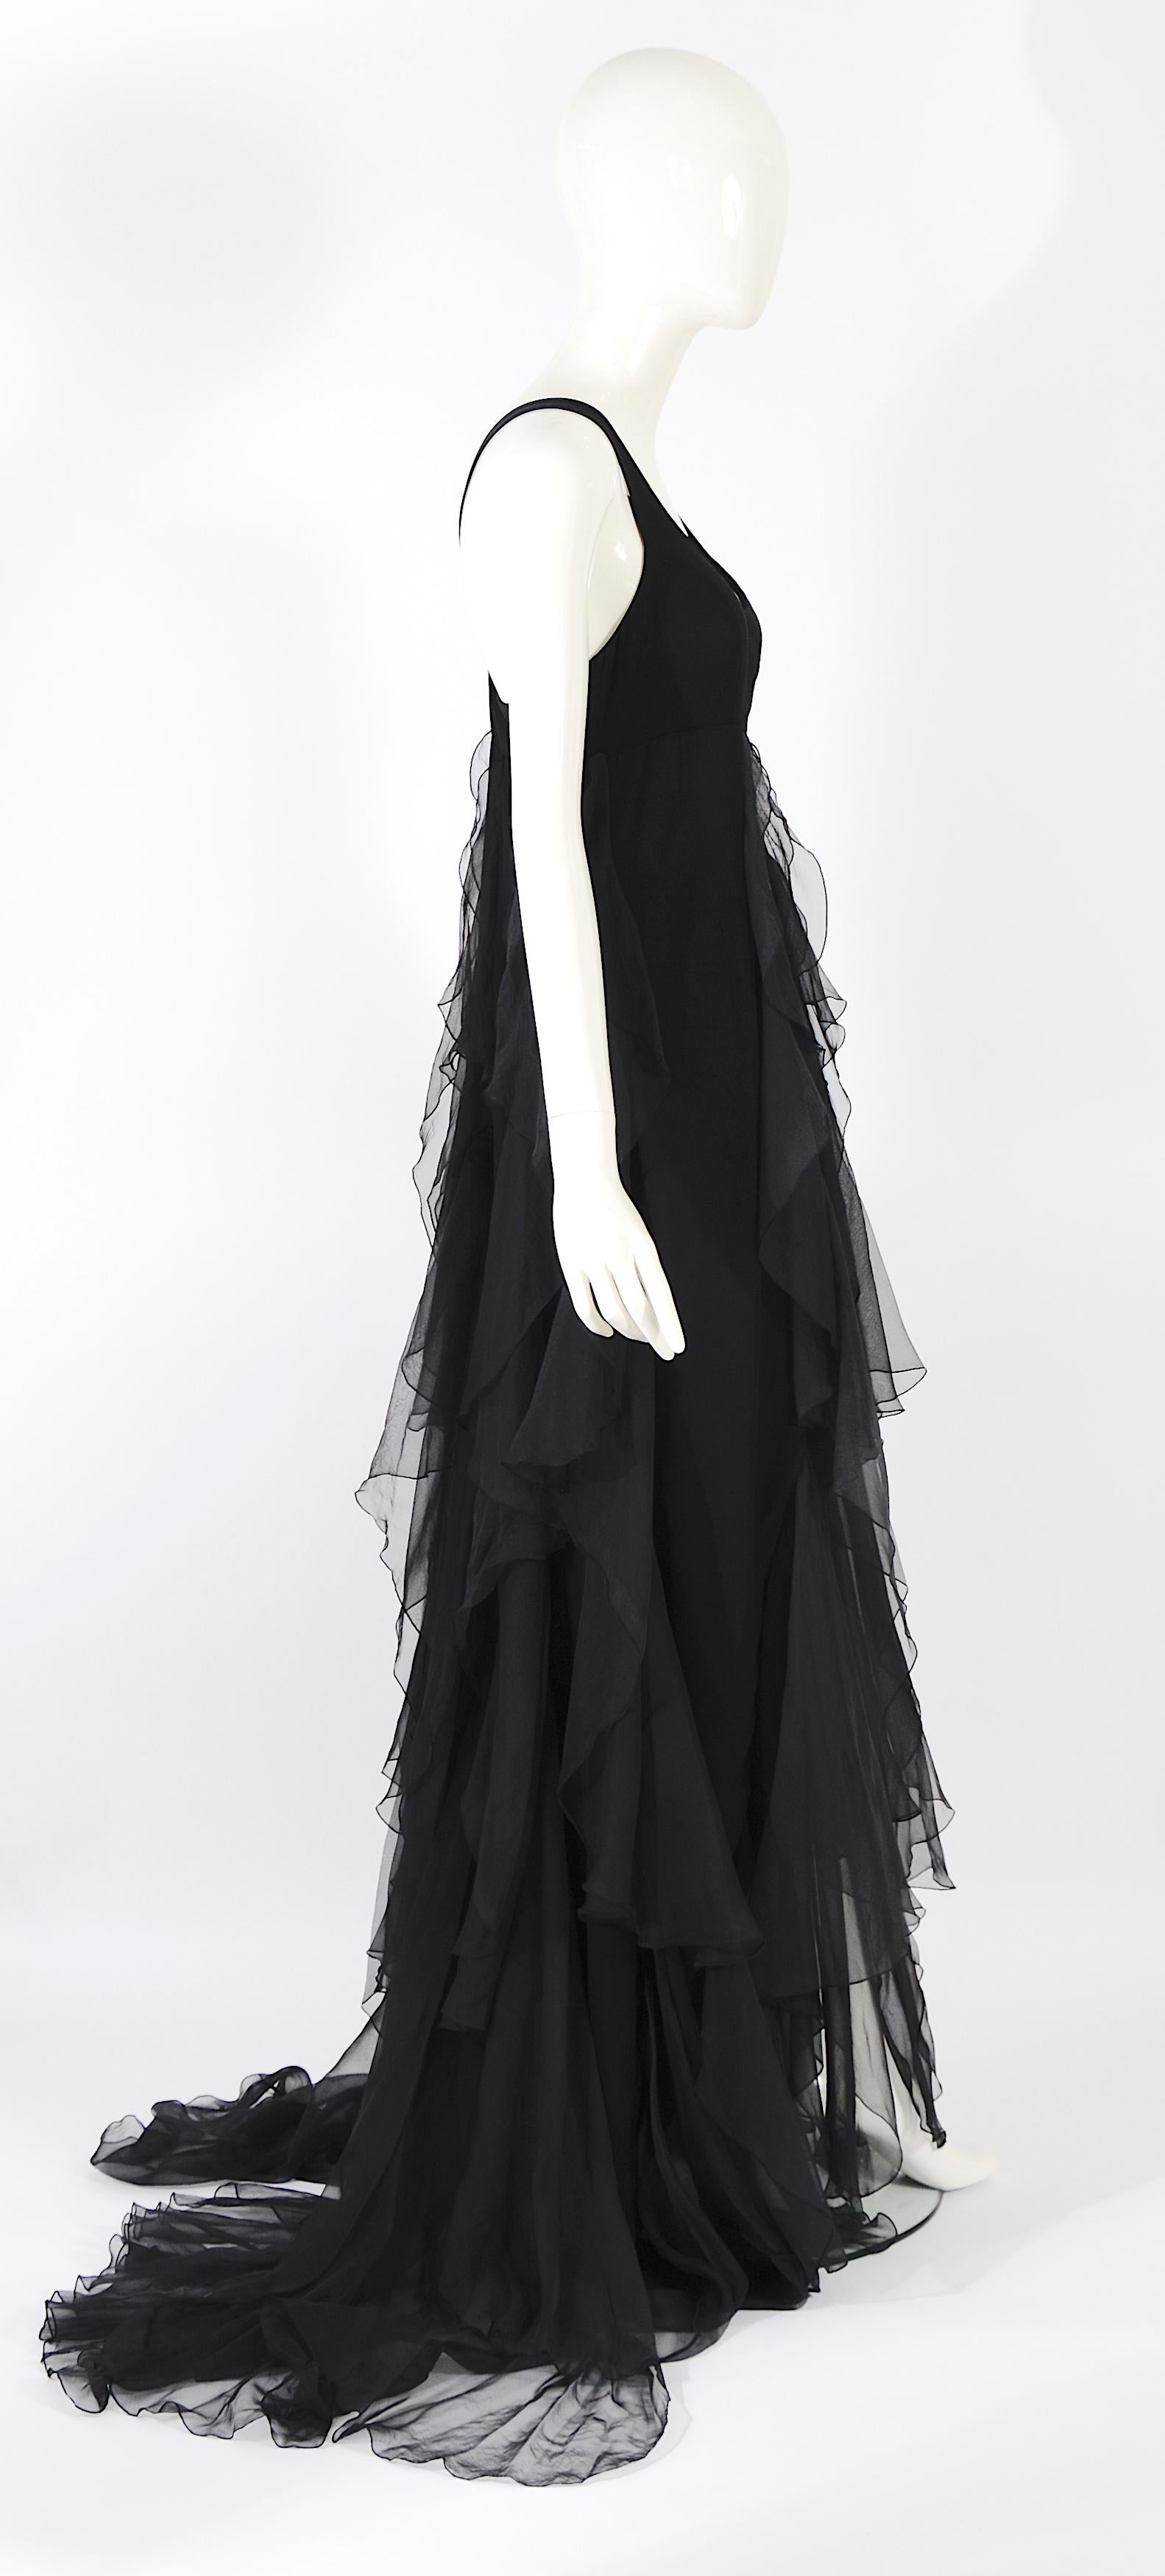 Christian Dior by Gianfranco Ferre S/S 1994 vintage black silk evening dress For Sale 4